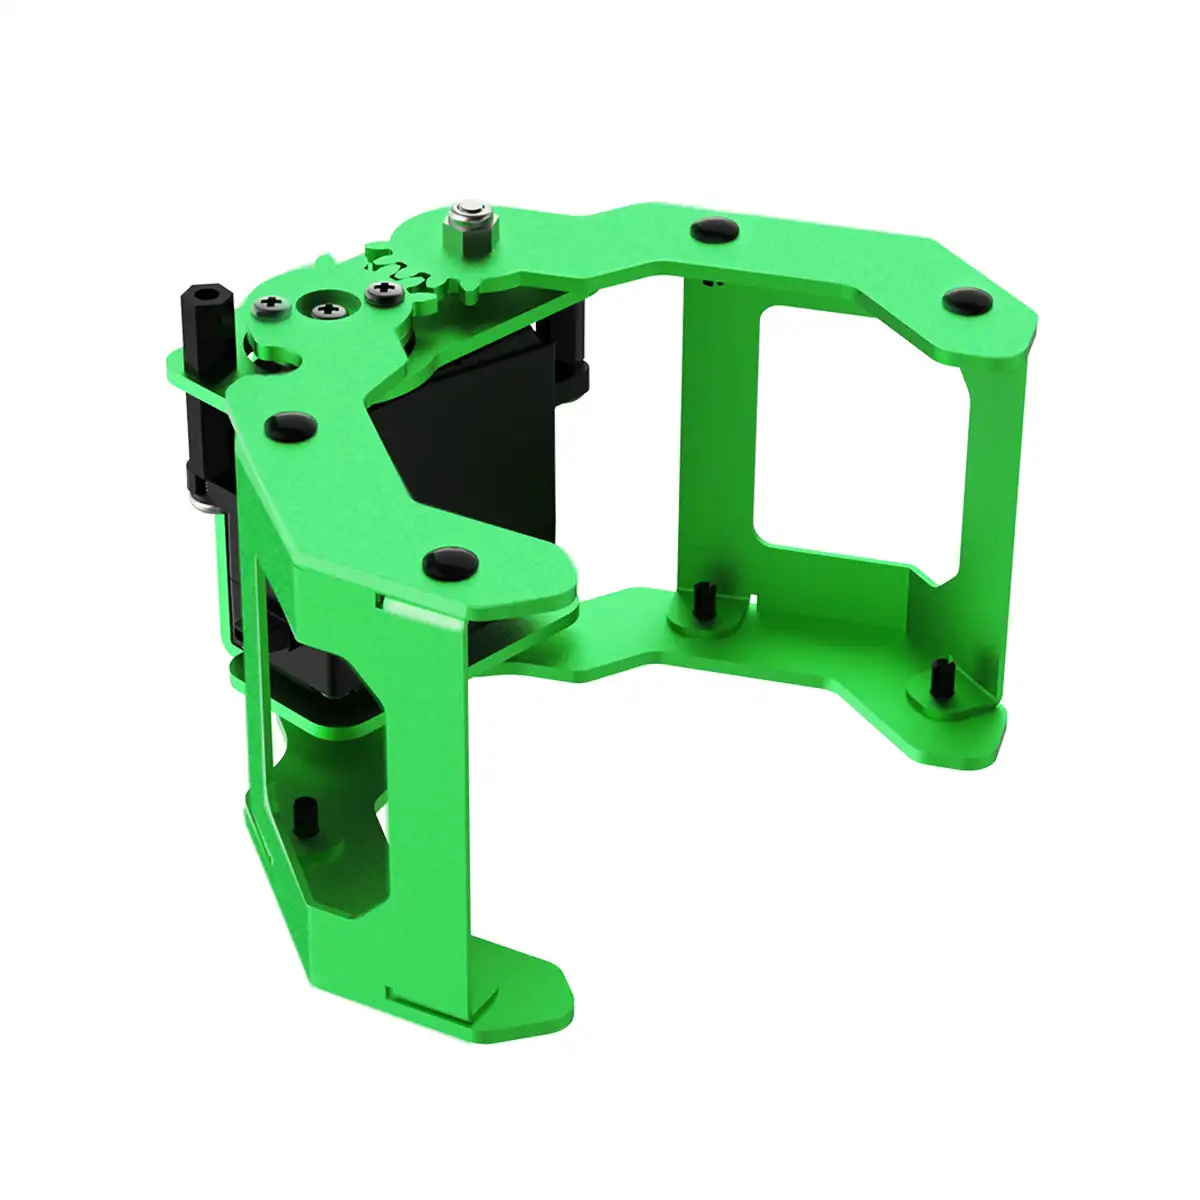 

Green Robot Claw with Ldx-335mg Servo Manipulator Gripper Aluminium Alloy Flexible Opening and Closing for Robotic Arm